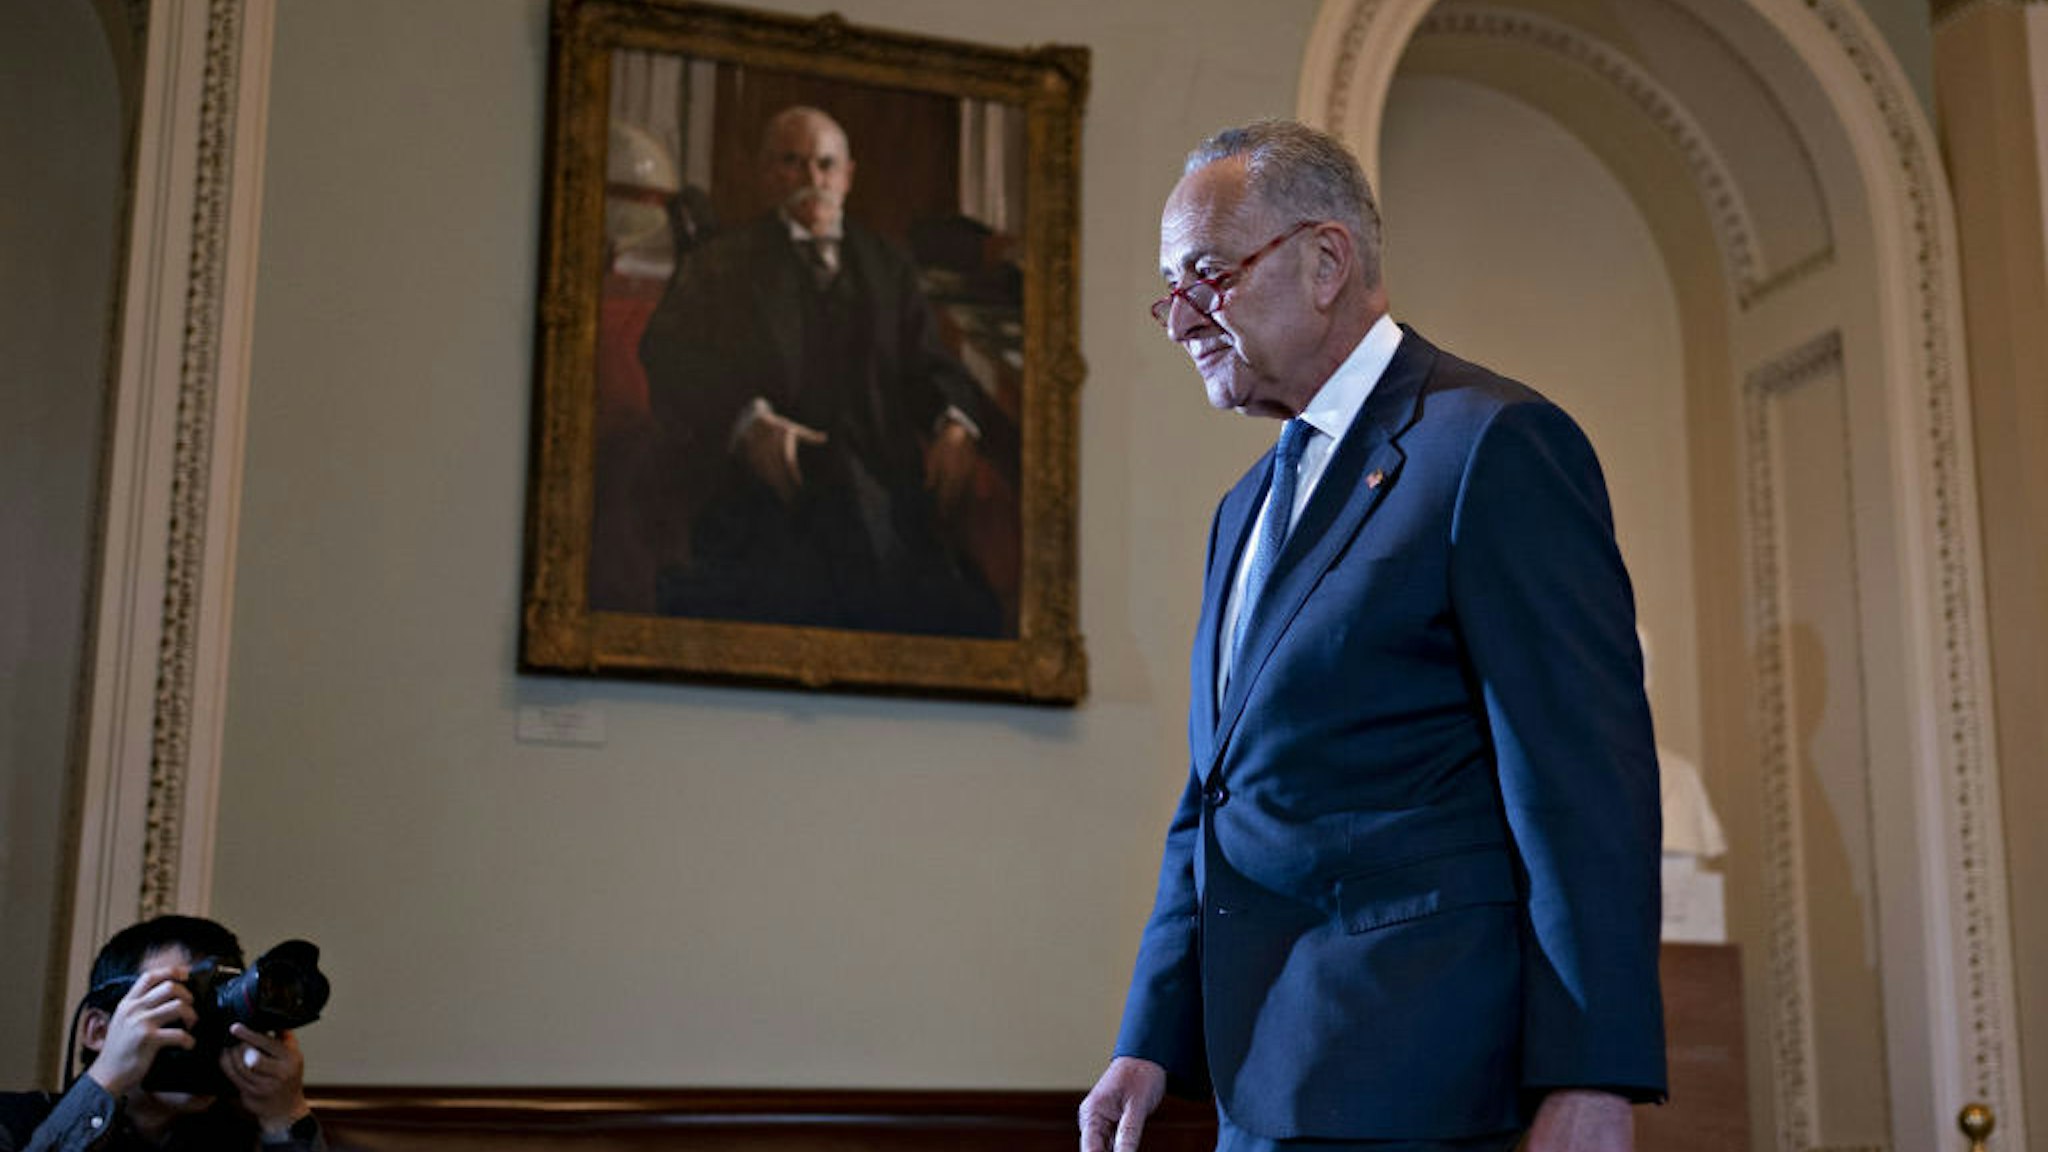 Senate Minority Leader Chuck Schumer, a Democrat from New York, walks to his office after speaking on the Senate floor at the U.S. Capitol in Washington, D.C., U.S., on Friday, Jan. 3, 2020. House Speaker Nancy Pelosi and Senate Majority Leader Mitch McConnell are locked in a stare-down over the terms of President Donald Trump's impeachment trial, which carries political risks for both sides if it continues deeper into January. Photographer: Andrew Harrer/Bloomberg